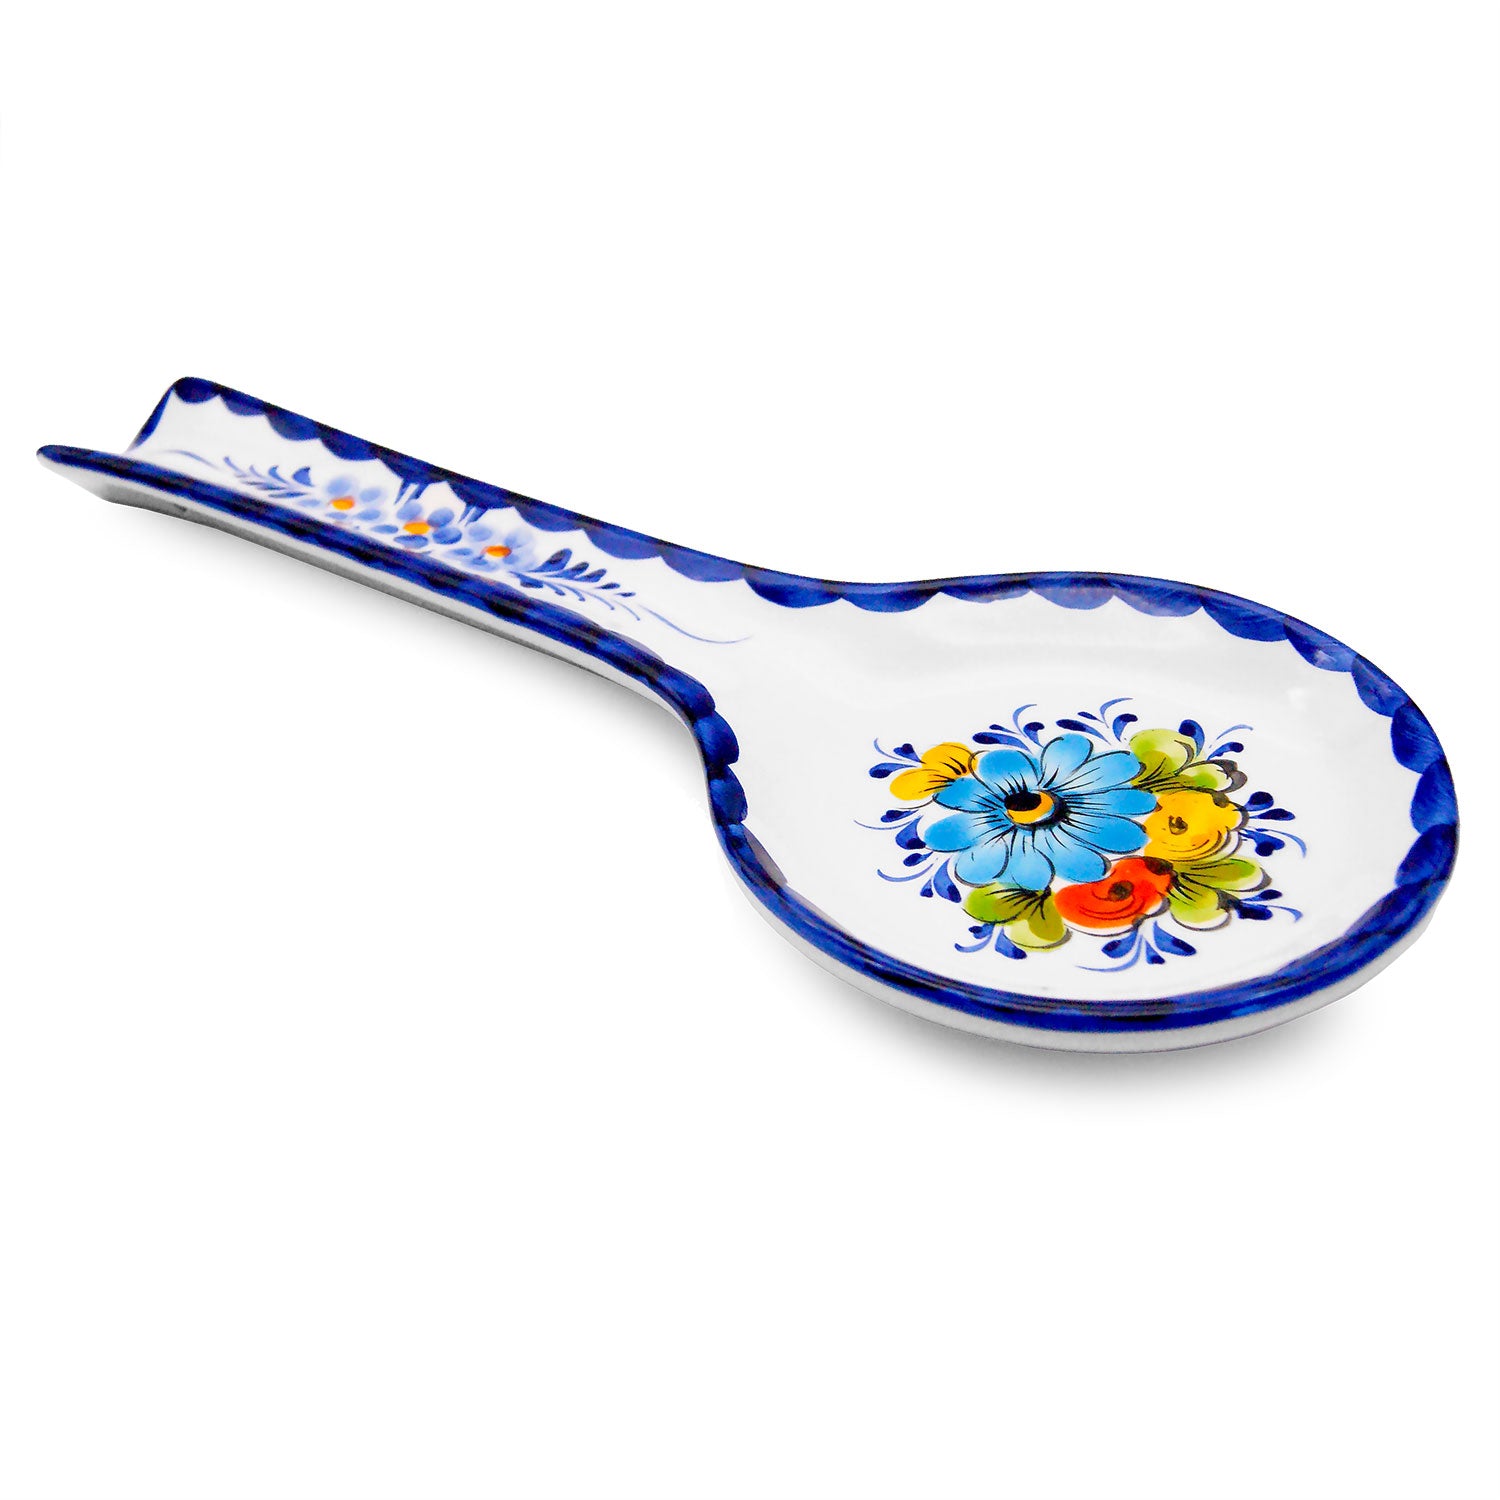 Portuguese Pottery Alcobaça Ceramic Hand Painted Kitchen Spoon Rest for Stove Top Made in Portugal